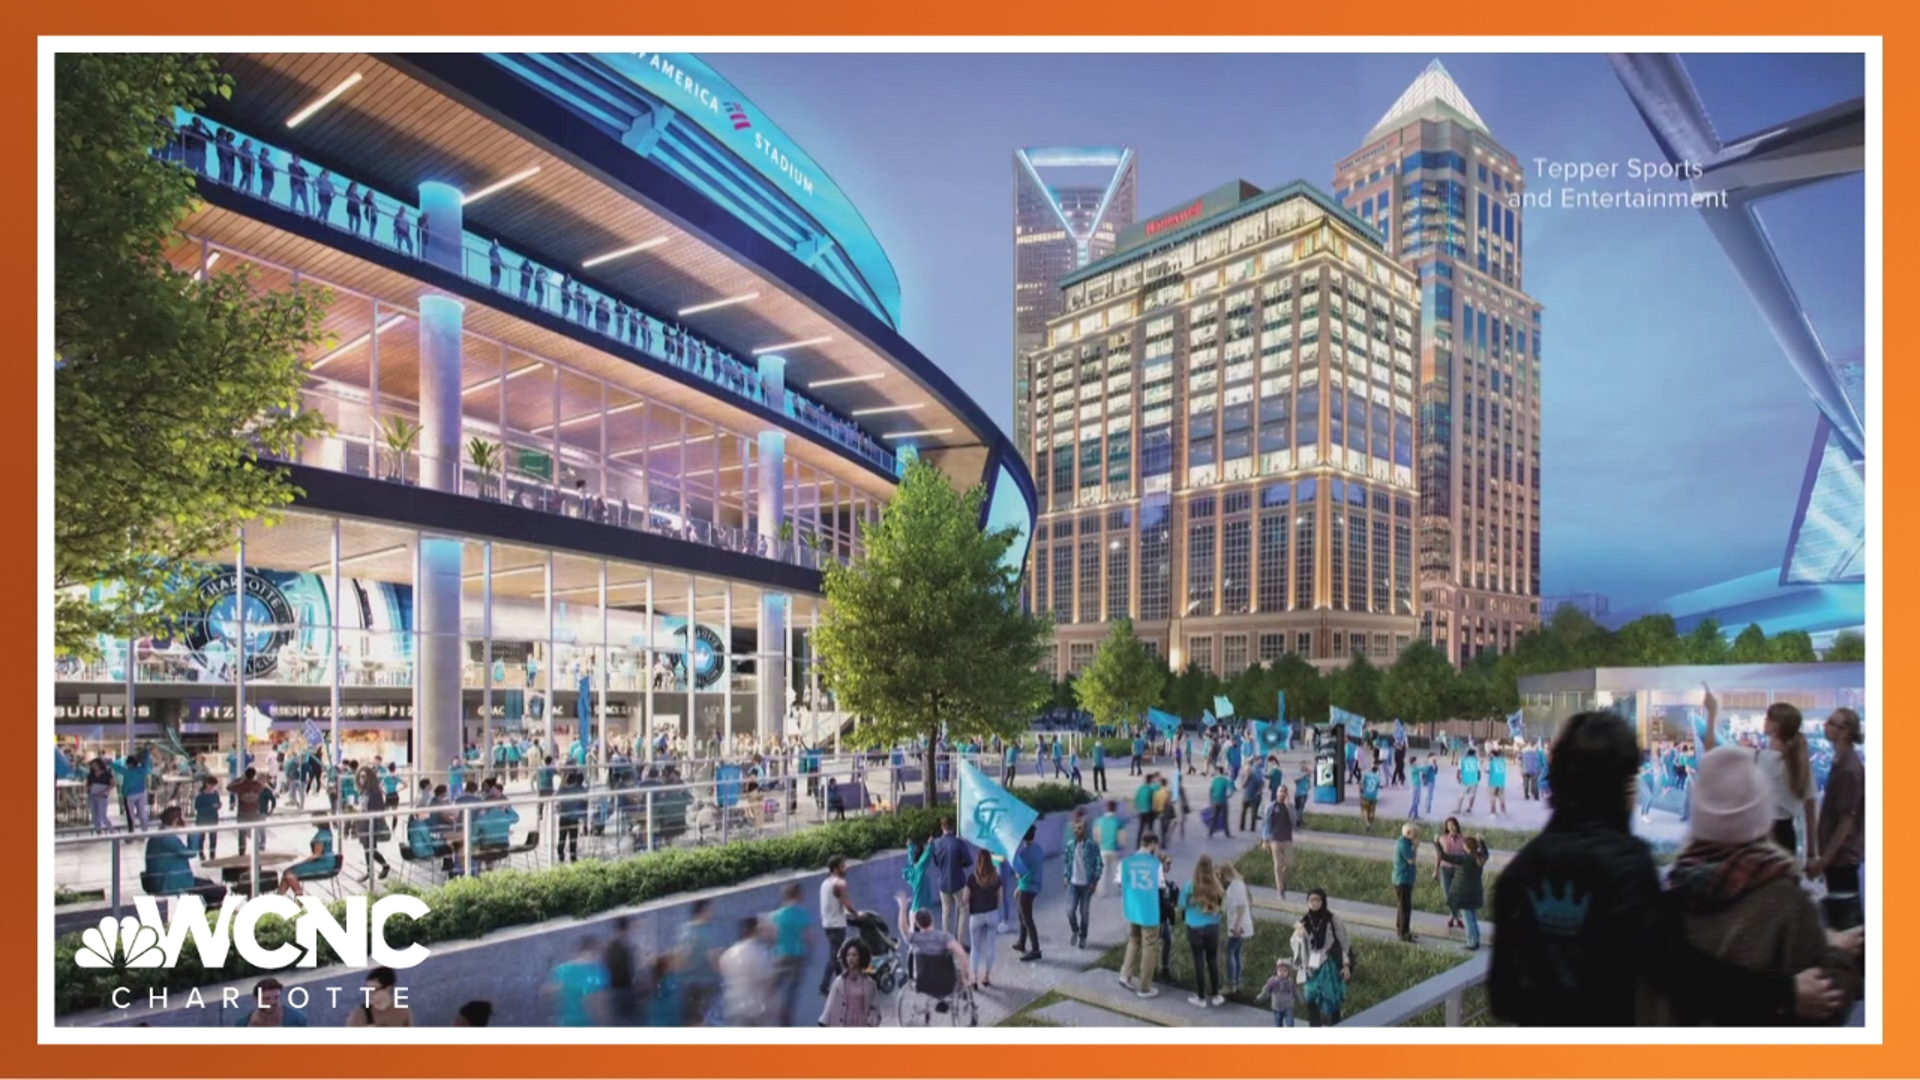 Tepper Sports & Entertainment announced plans for major renovations at Bank of America Stadium Monday, saying the decades-old venue "needs to evolve."